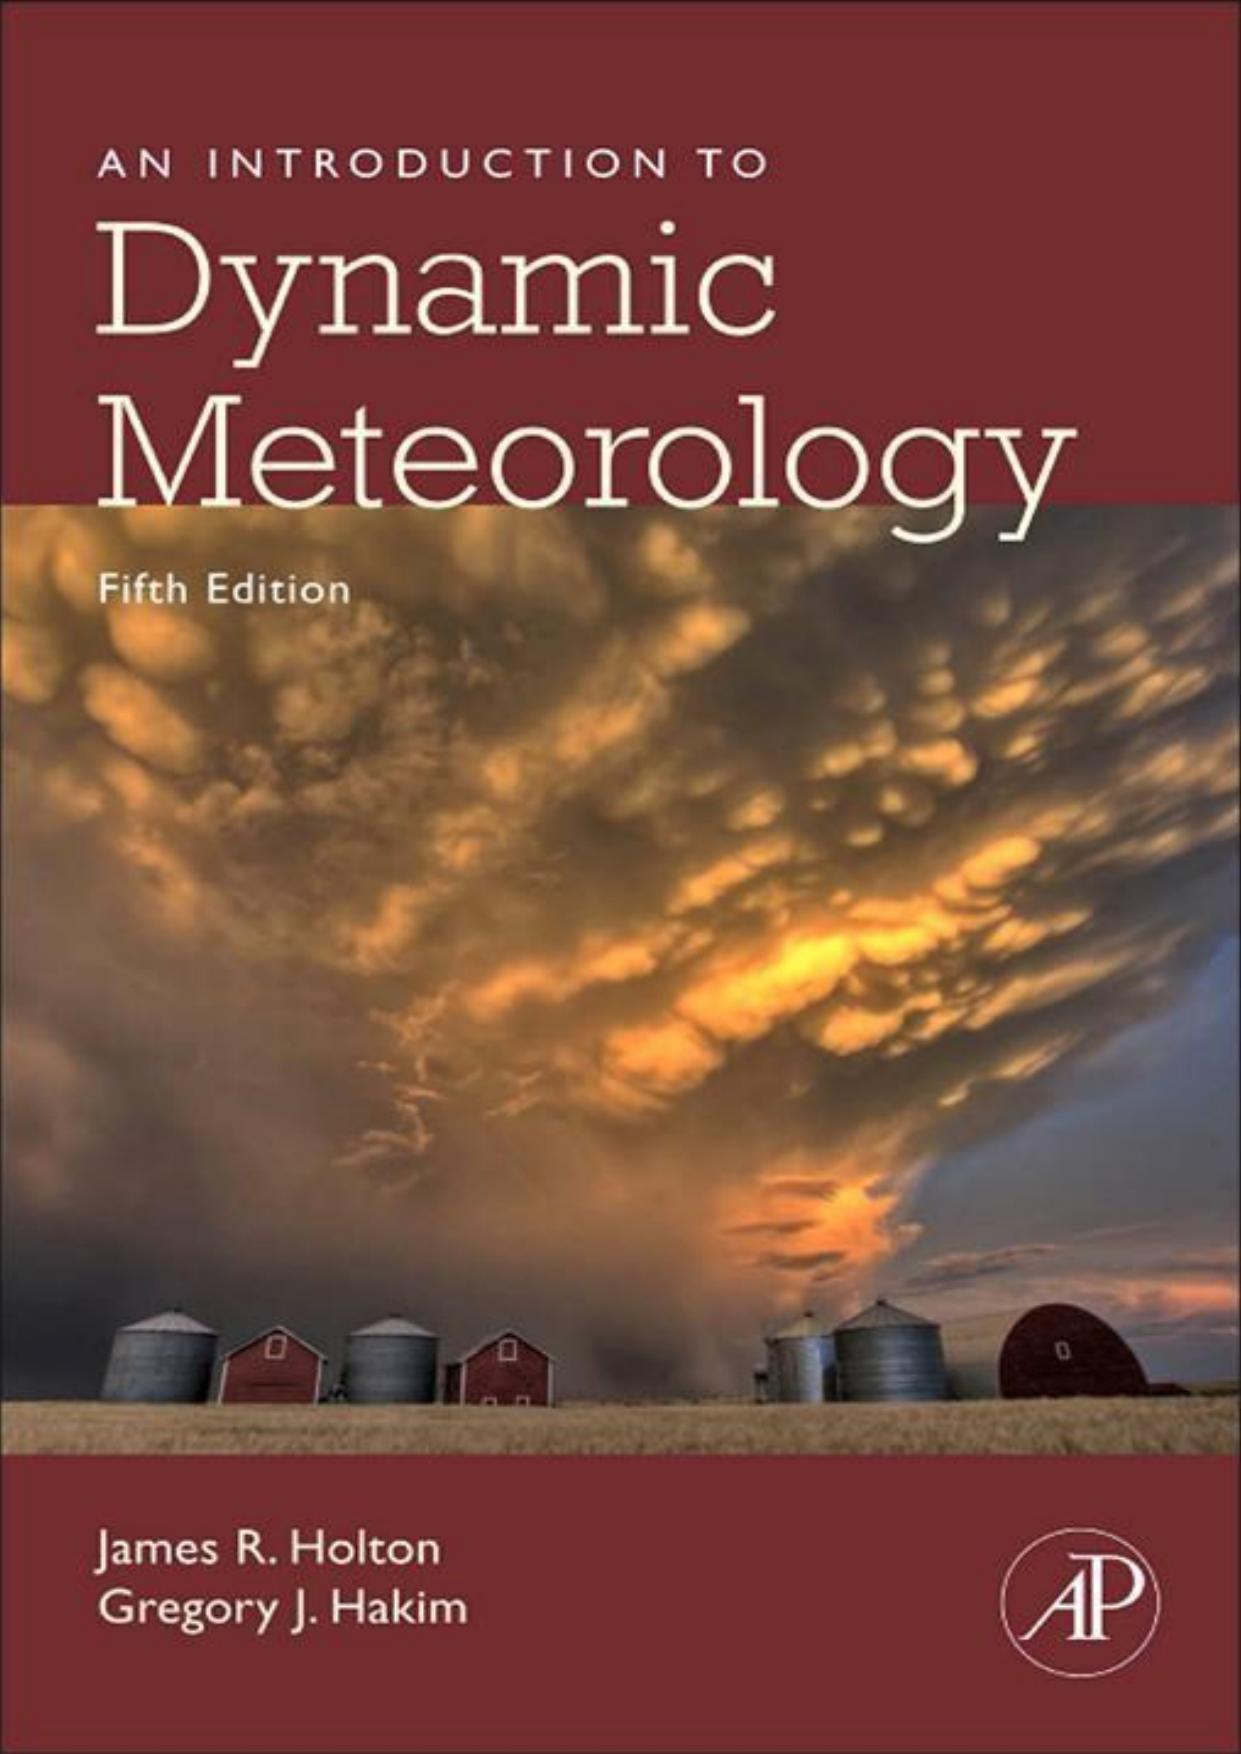 An Introduction to Dynamic Meteorology by James R. Holton & Gregory J. Hakim